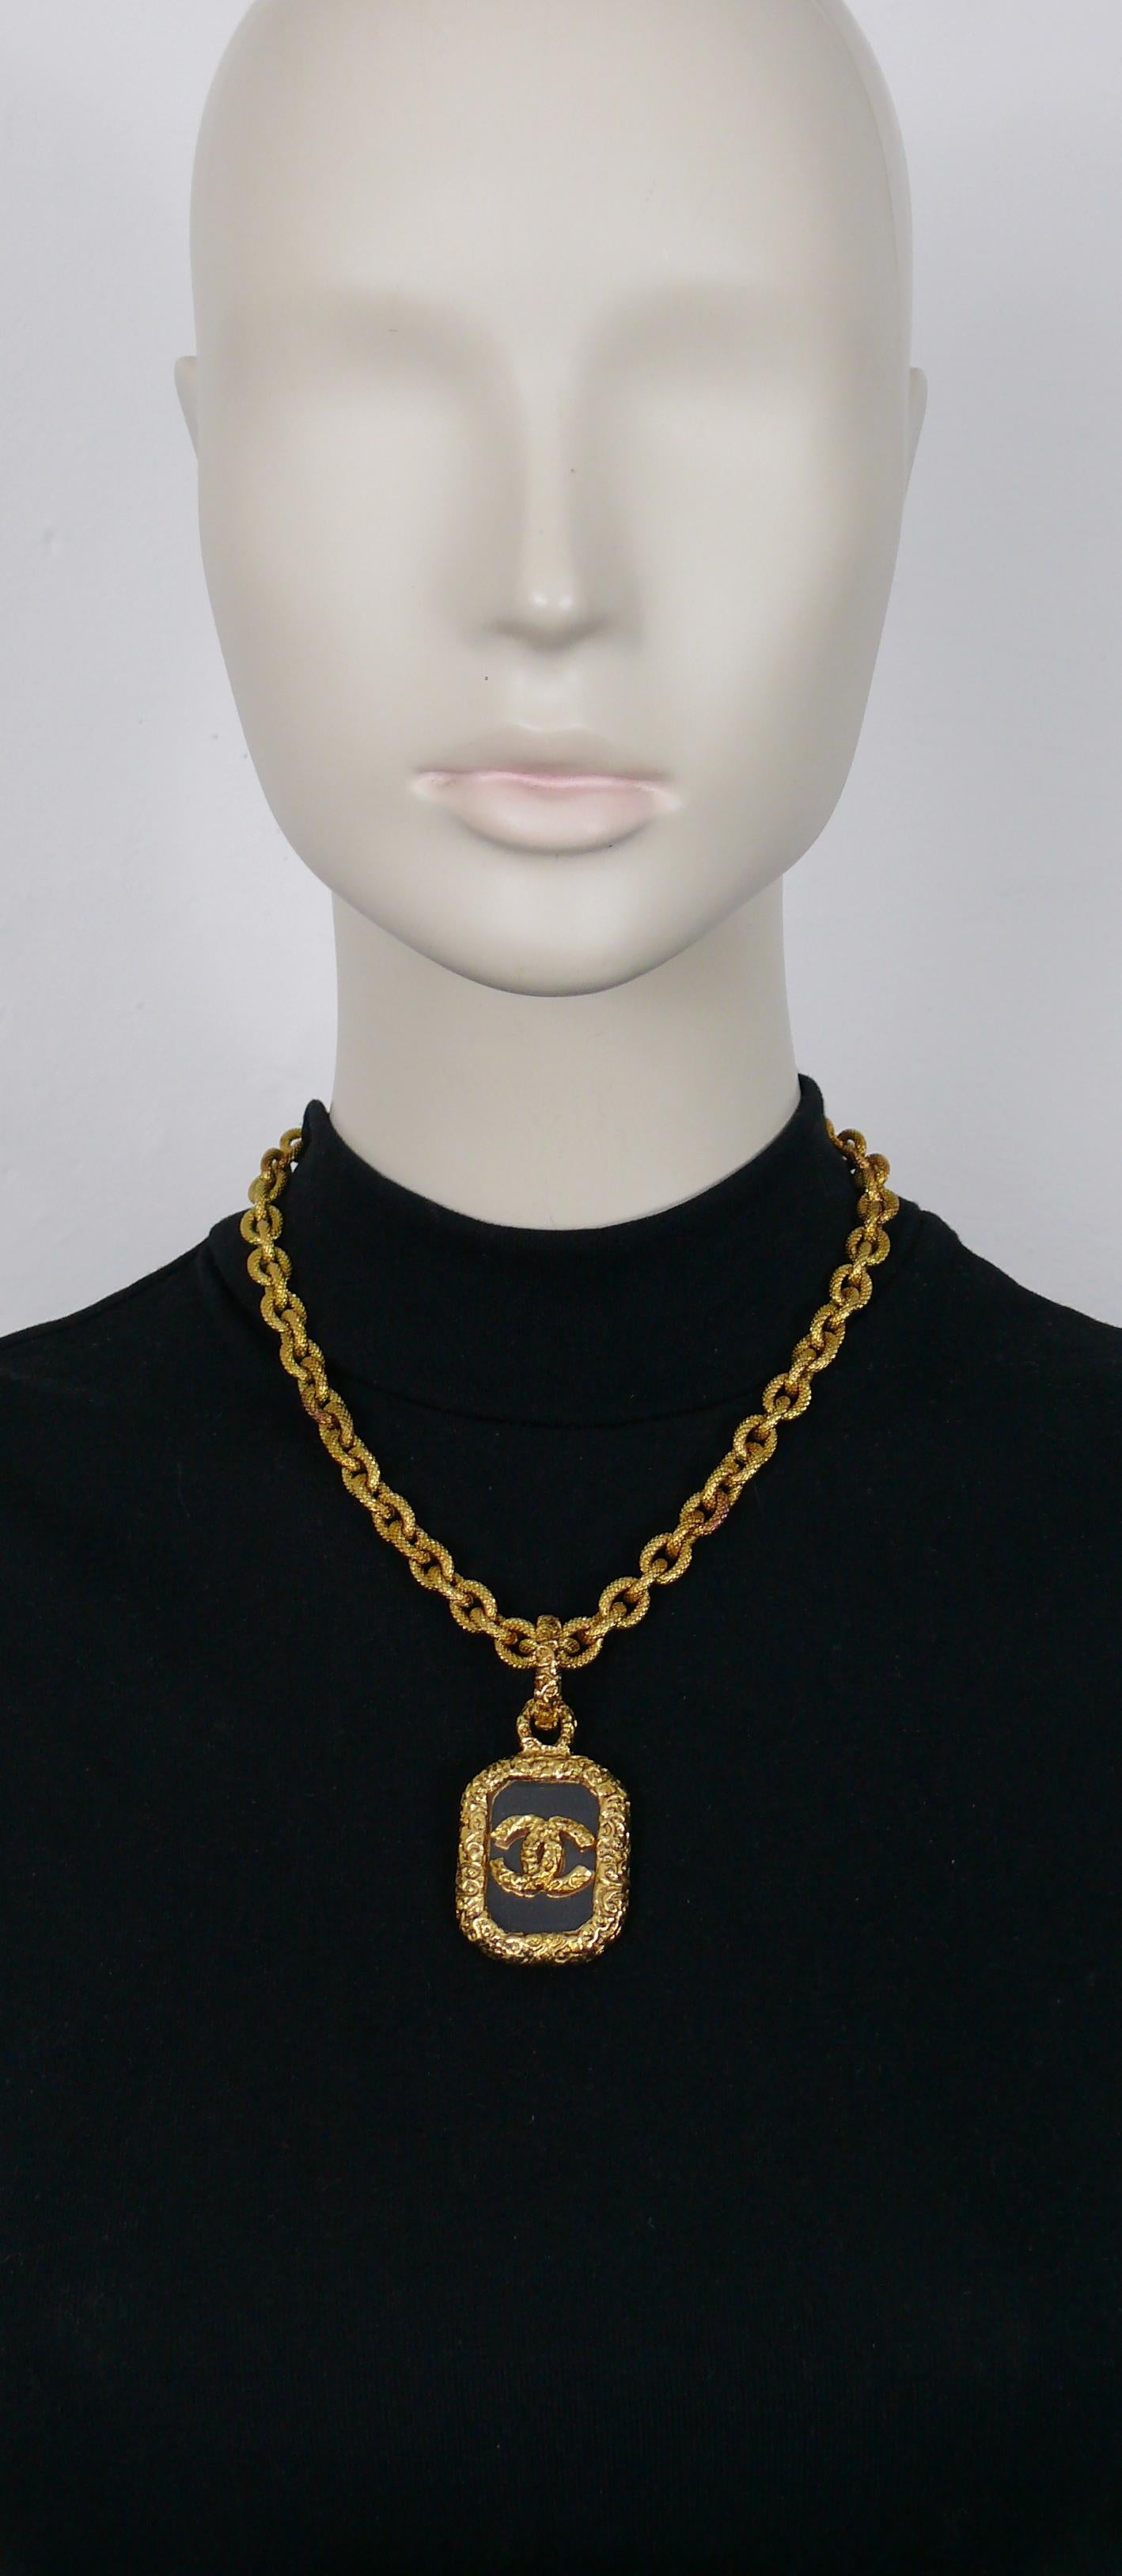 CHANEL vintage gold toned textured chain necklace featuring a rectangular pendant with CC logo on a clear lucite background.

From the CHANEL Fall 1993 Collection.

Spring clasp closure.

Embossed on the bail CHANEL 93A Made in France.

Indicative